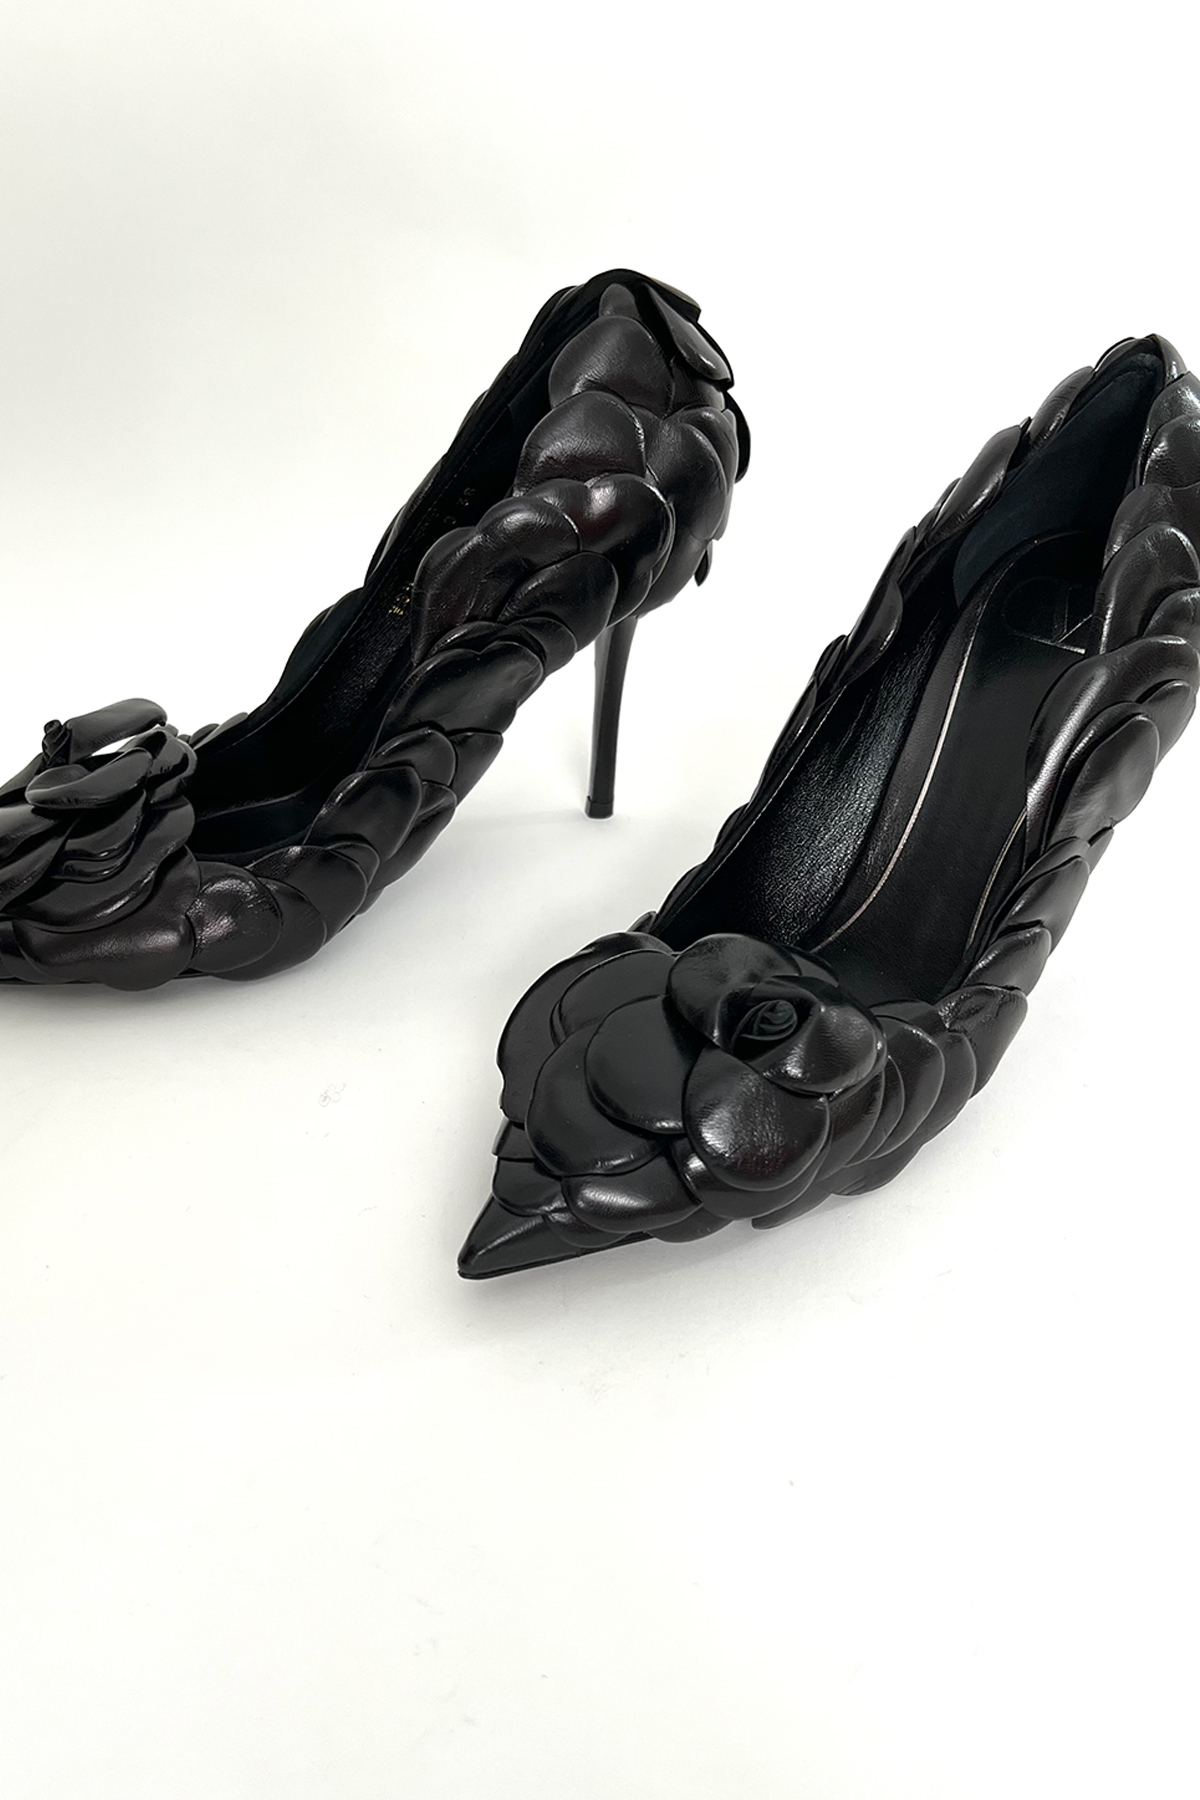 Valentino Heels Black With Roses - Size 38